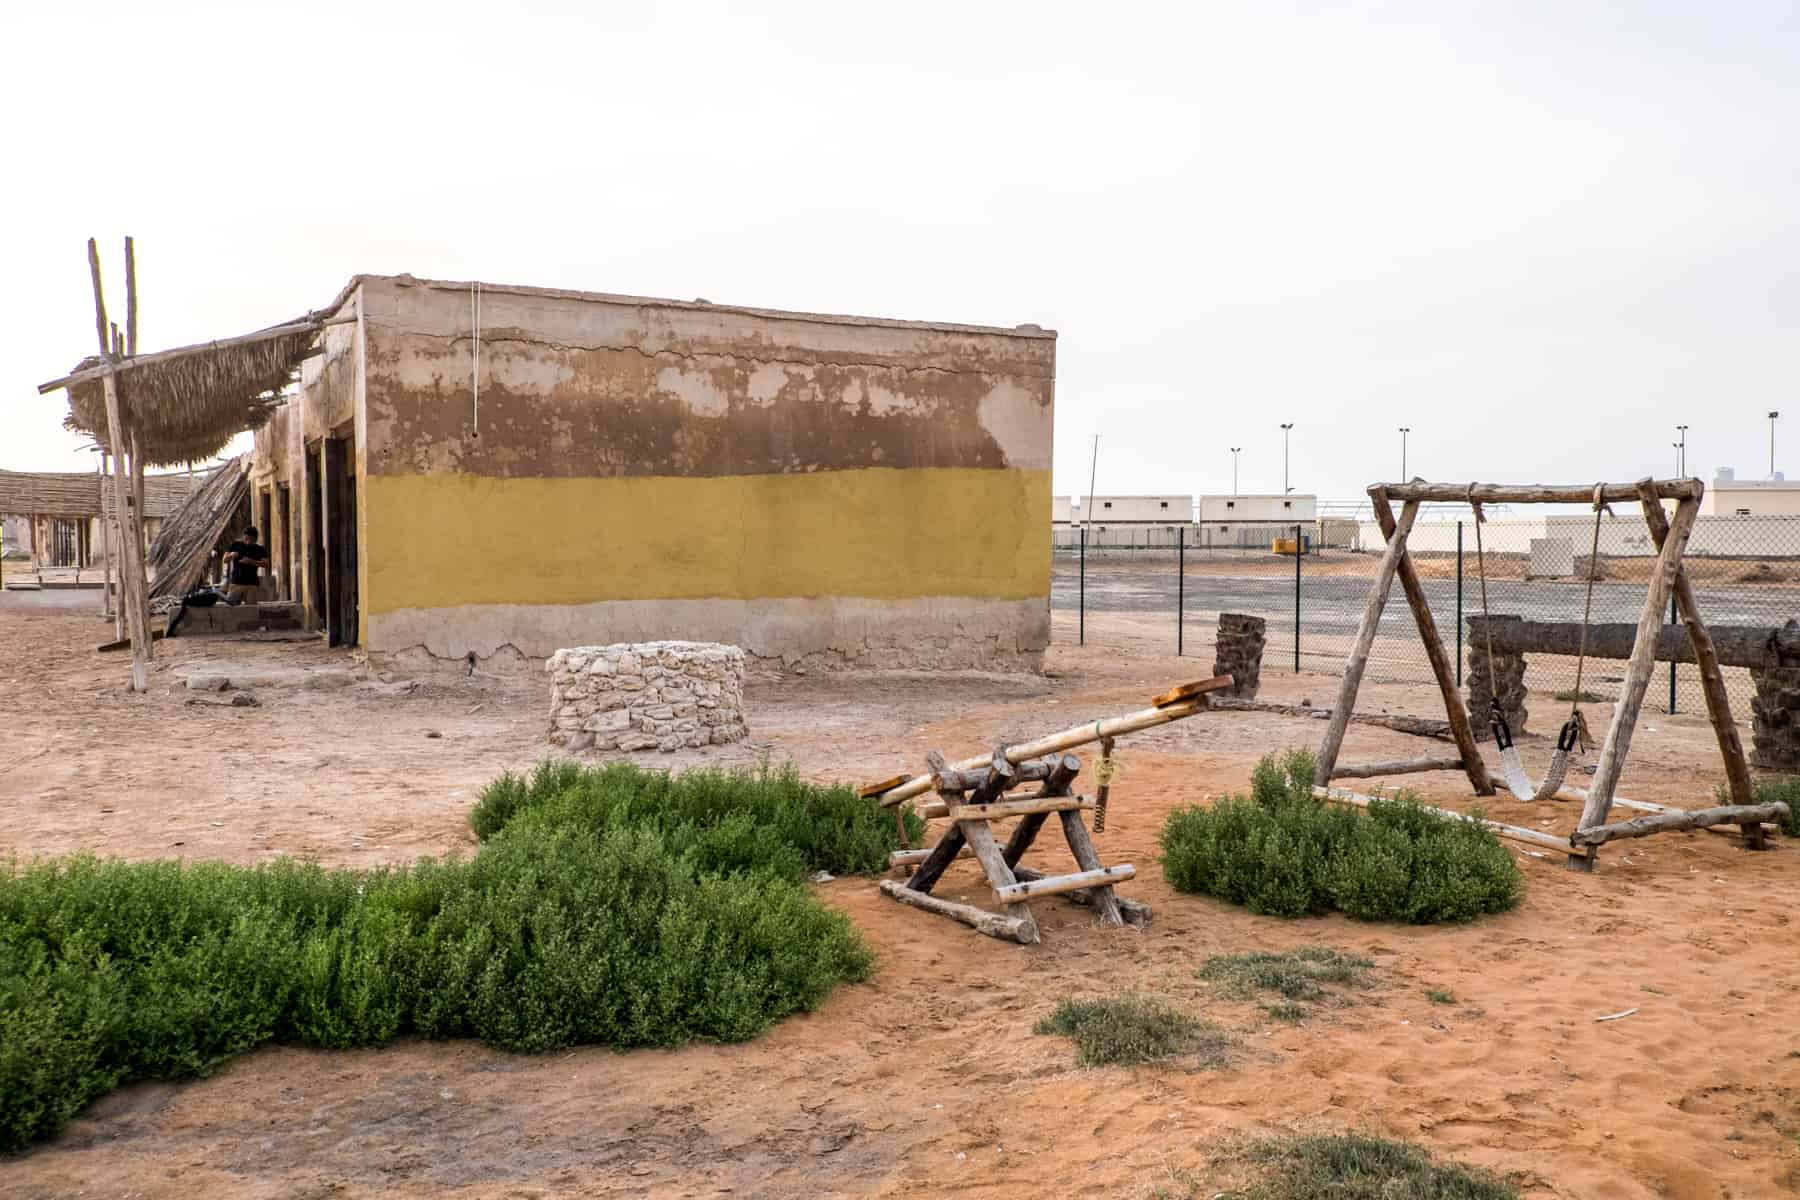 A abandoned playground, with a wooden swing and sea-saw, remains on the orange sand next to a yellow painted abandoned building in Ras Al Khaimah. 